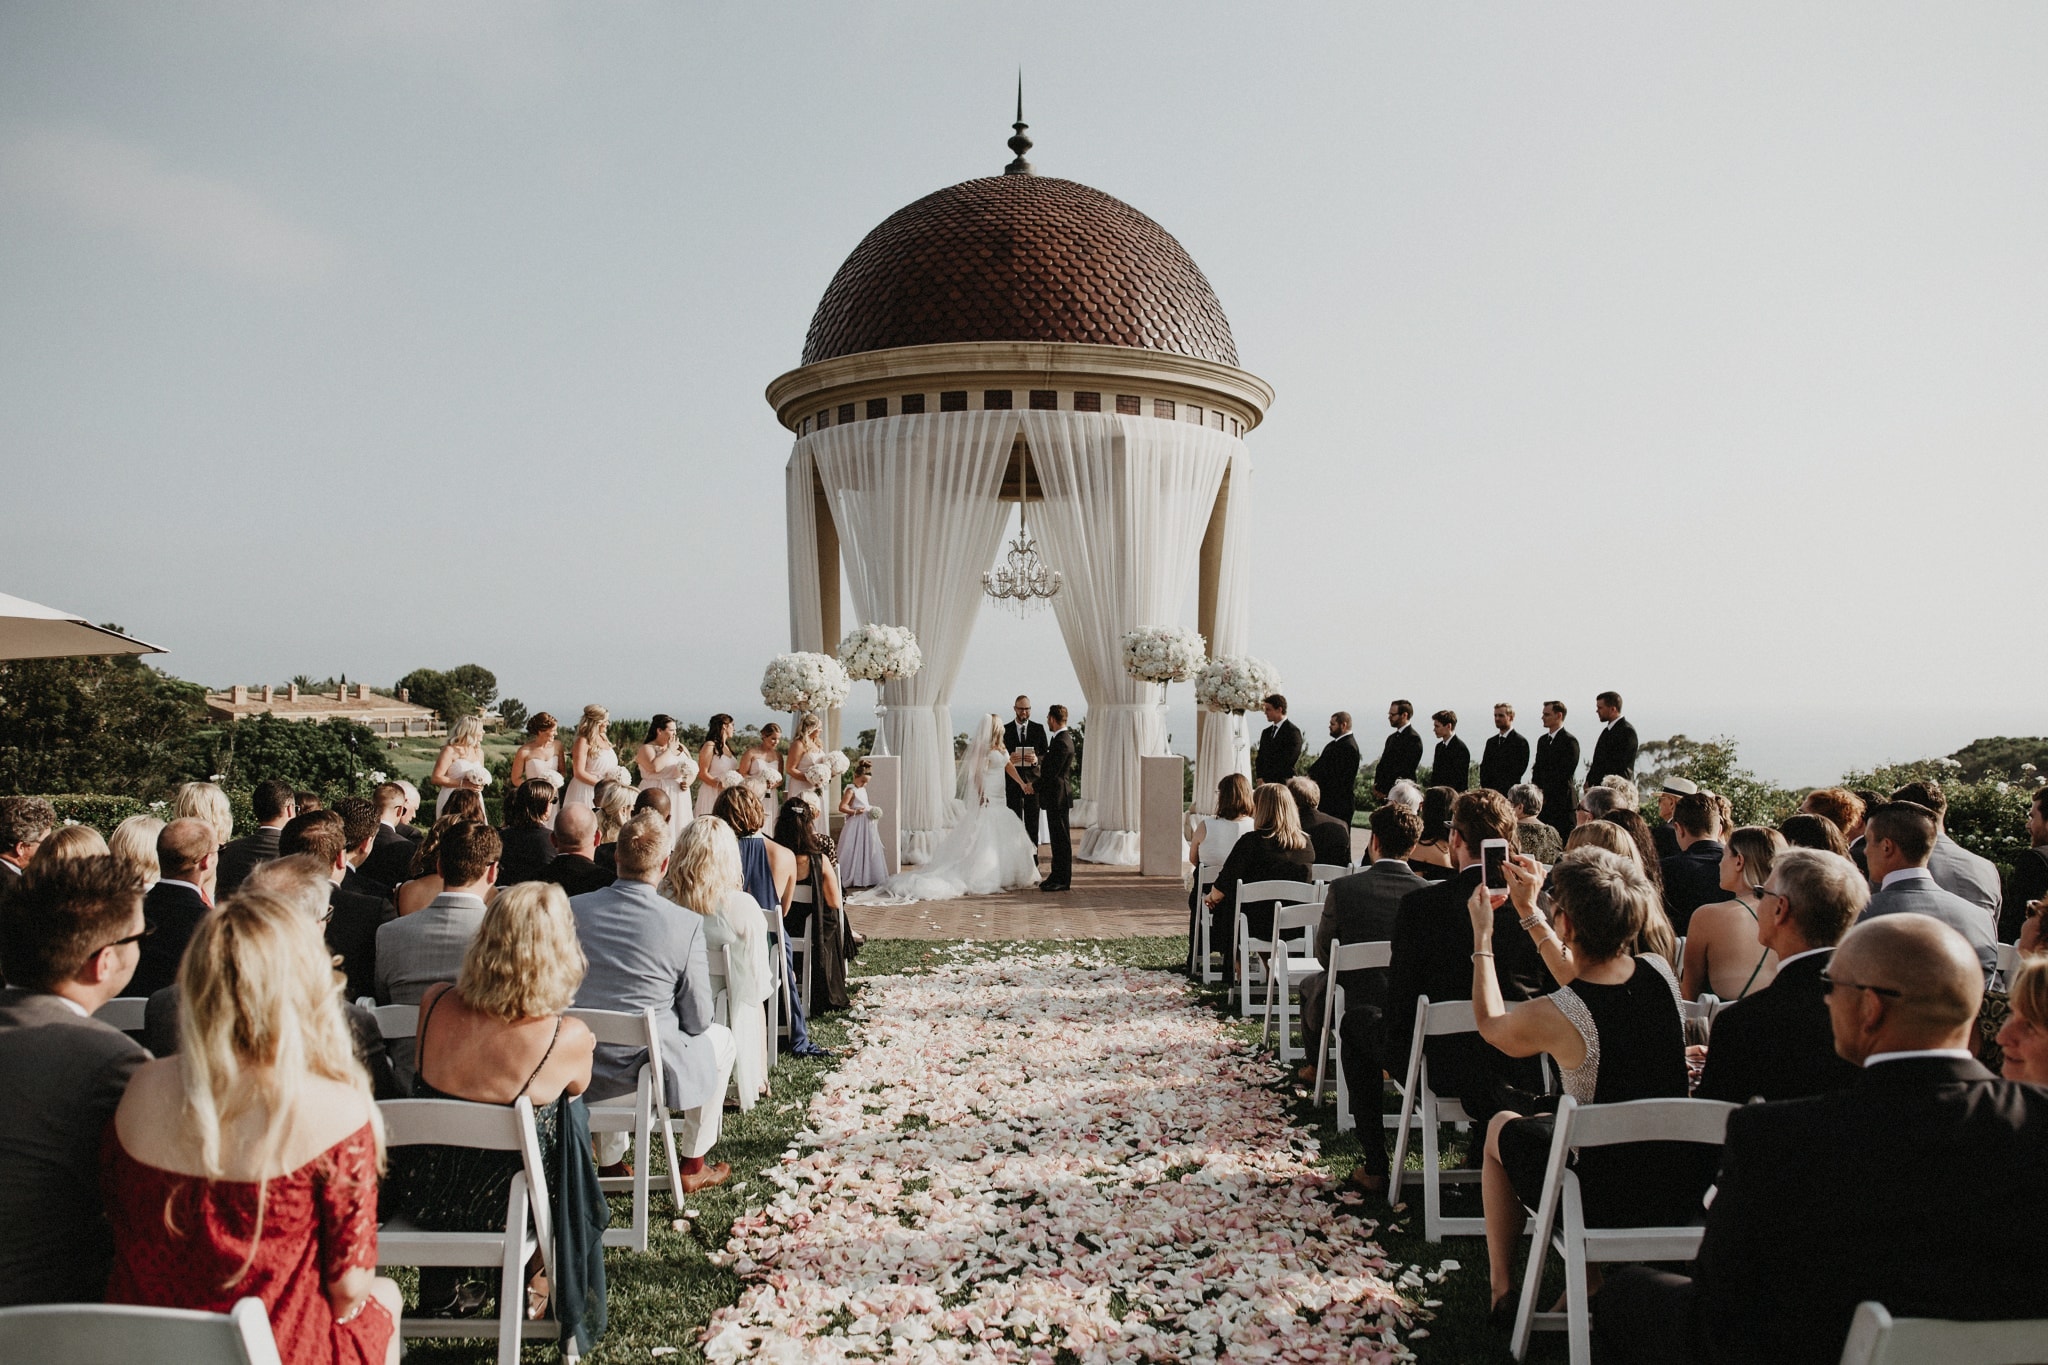 Guests watch as a bride and groom exchange vows in front of a beautiful alter at an outdoor wedding ceremony in Orange County.